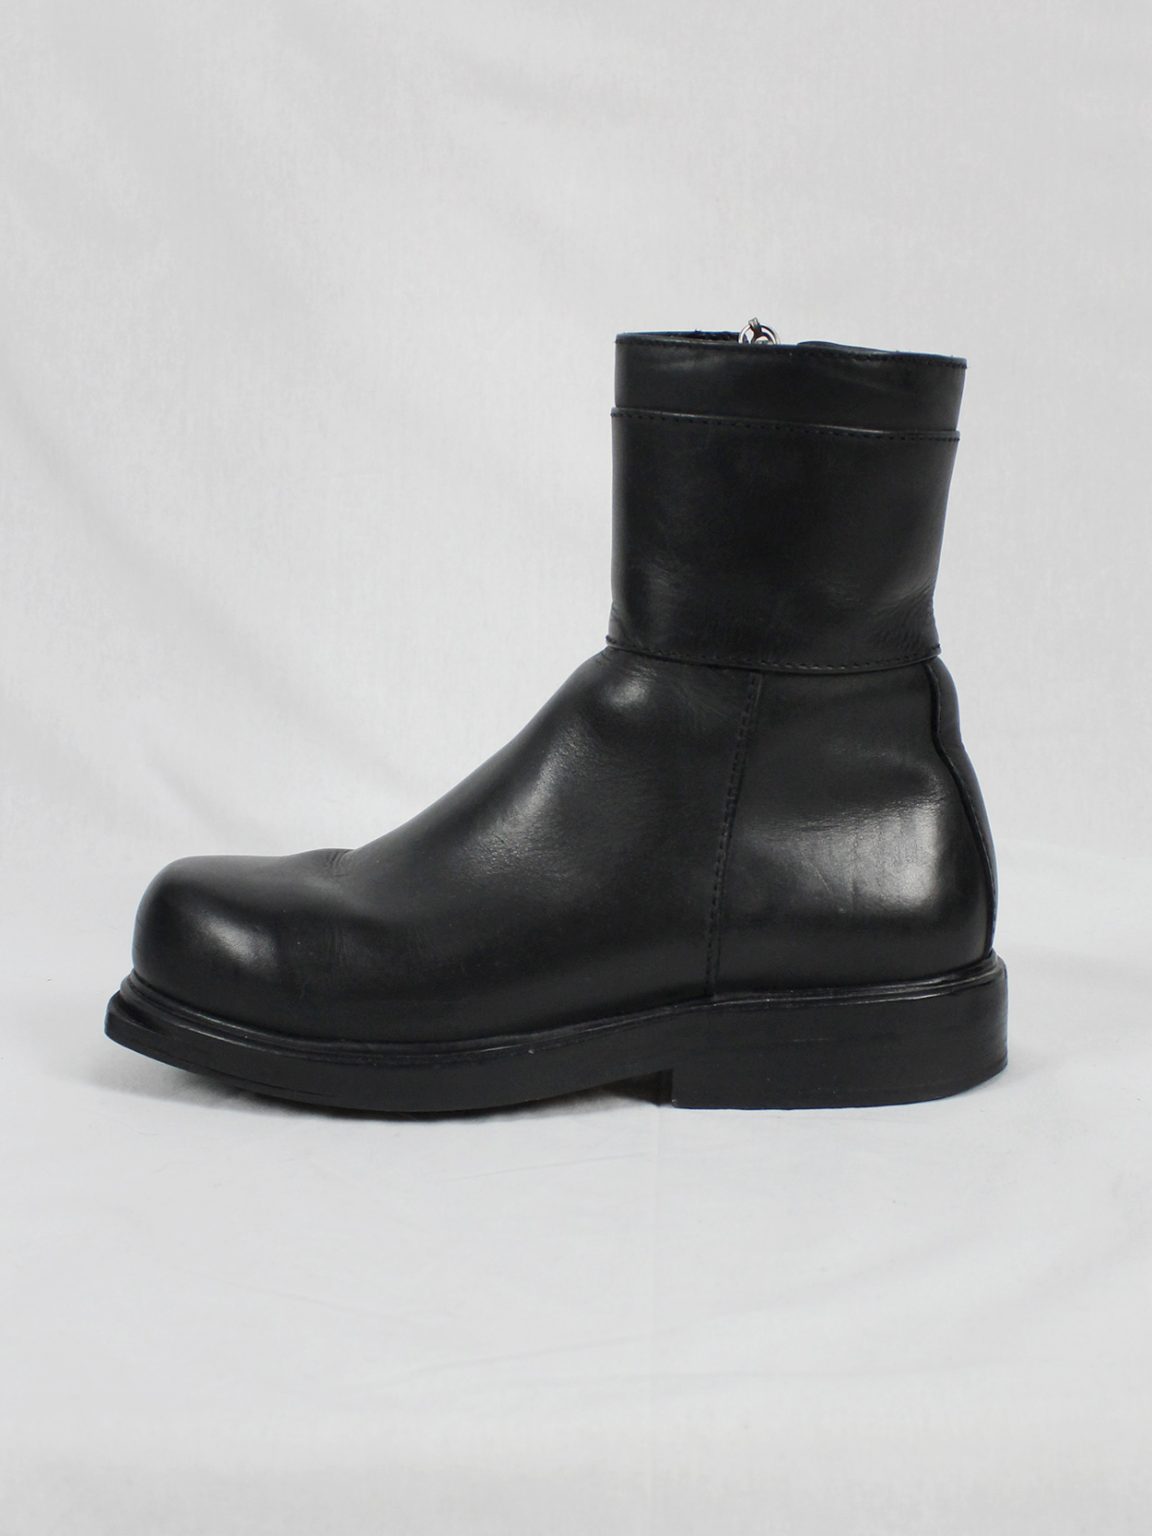 Dirk Bikkembergs black boots with mountaineering tip and brown band (41) — late 90's